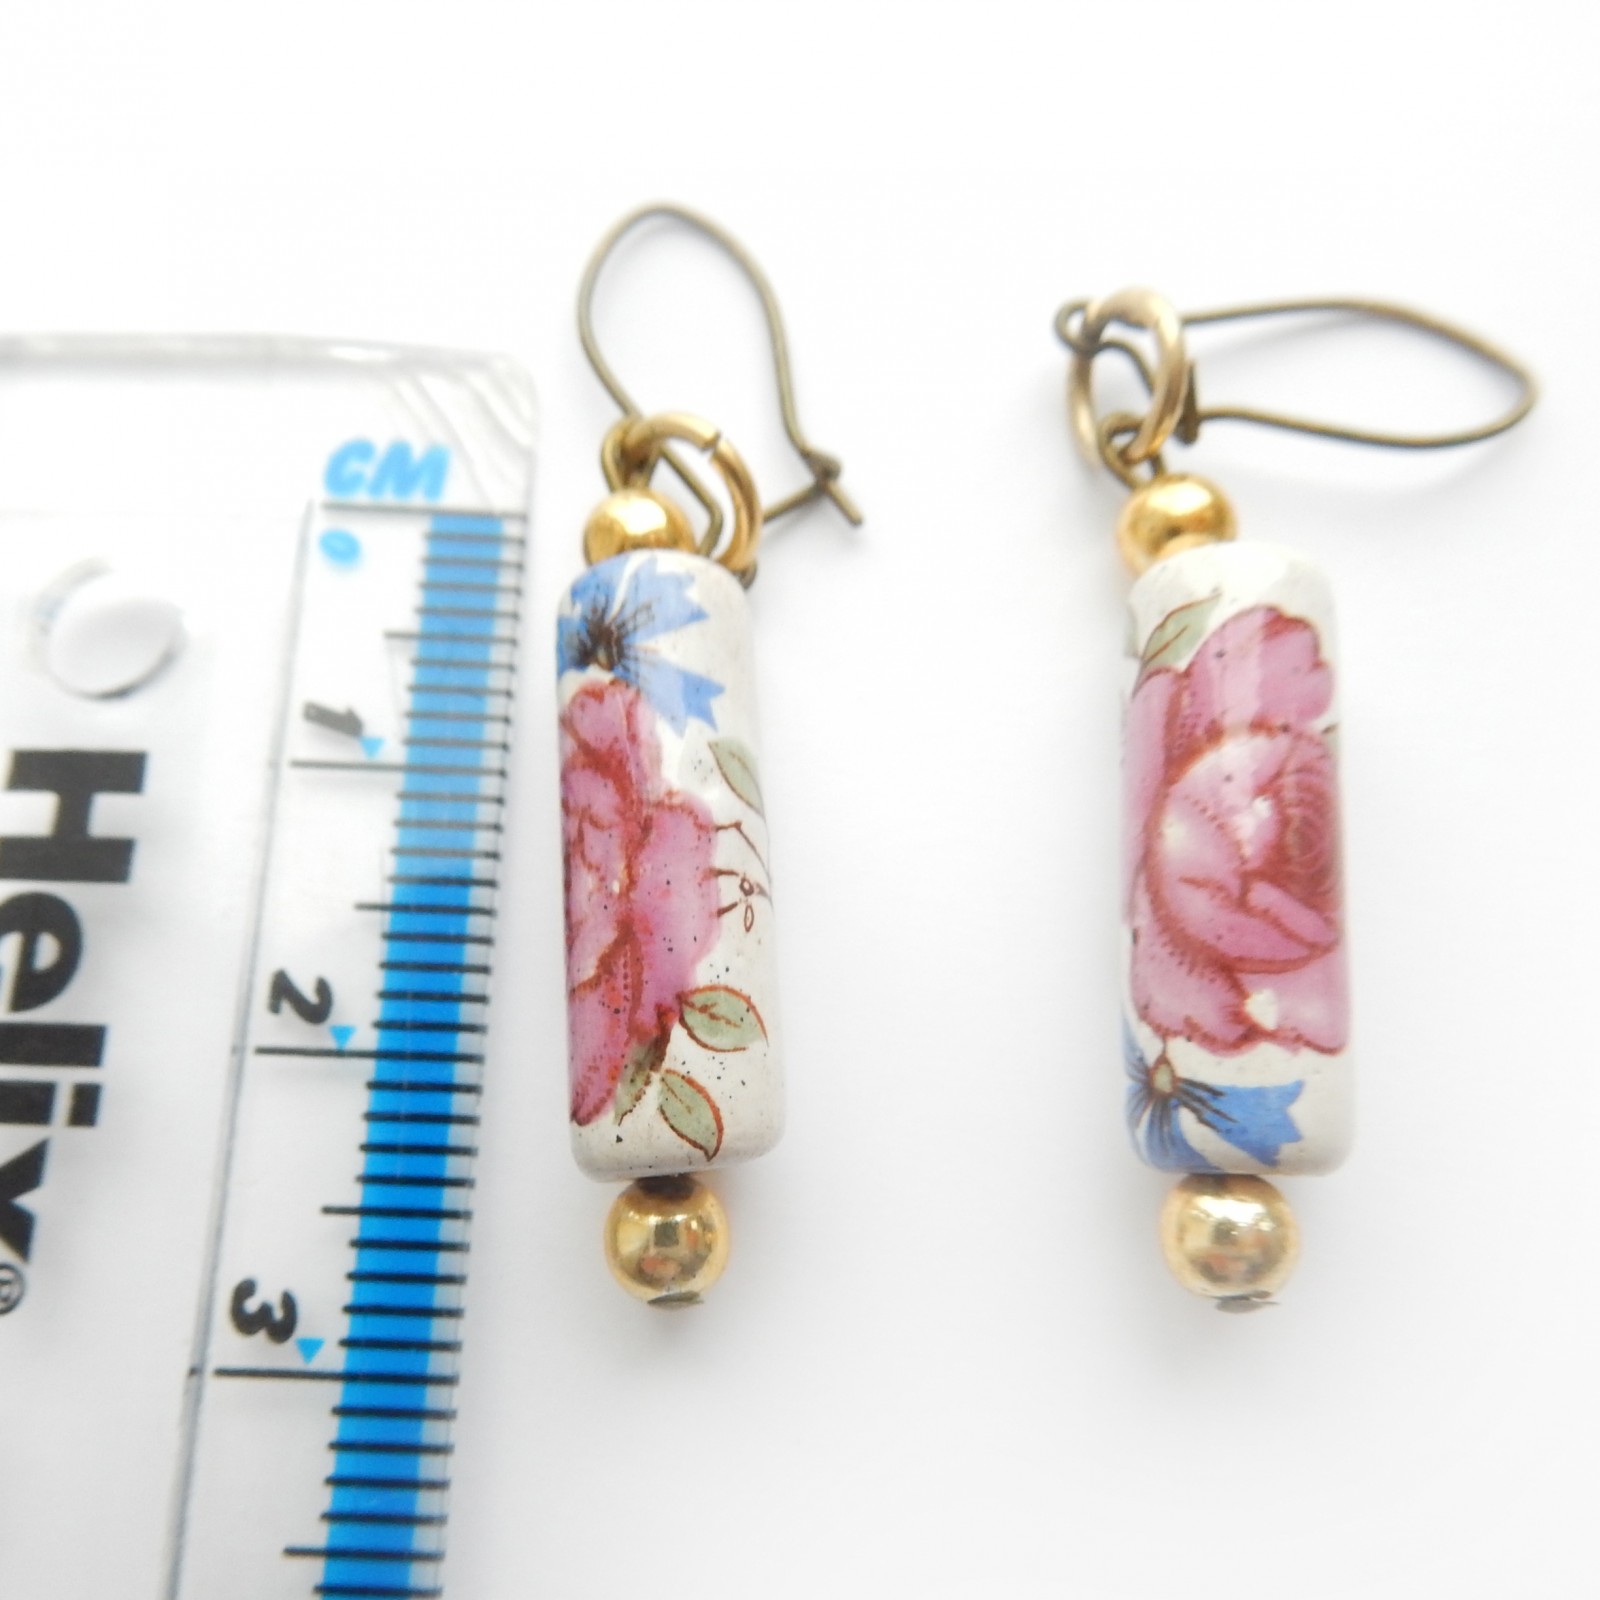 Photo of Vintage China Painted Rose Ceramic Earrings